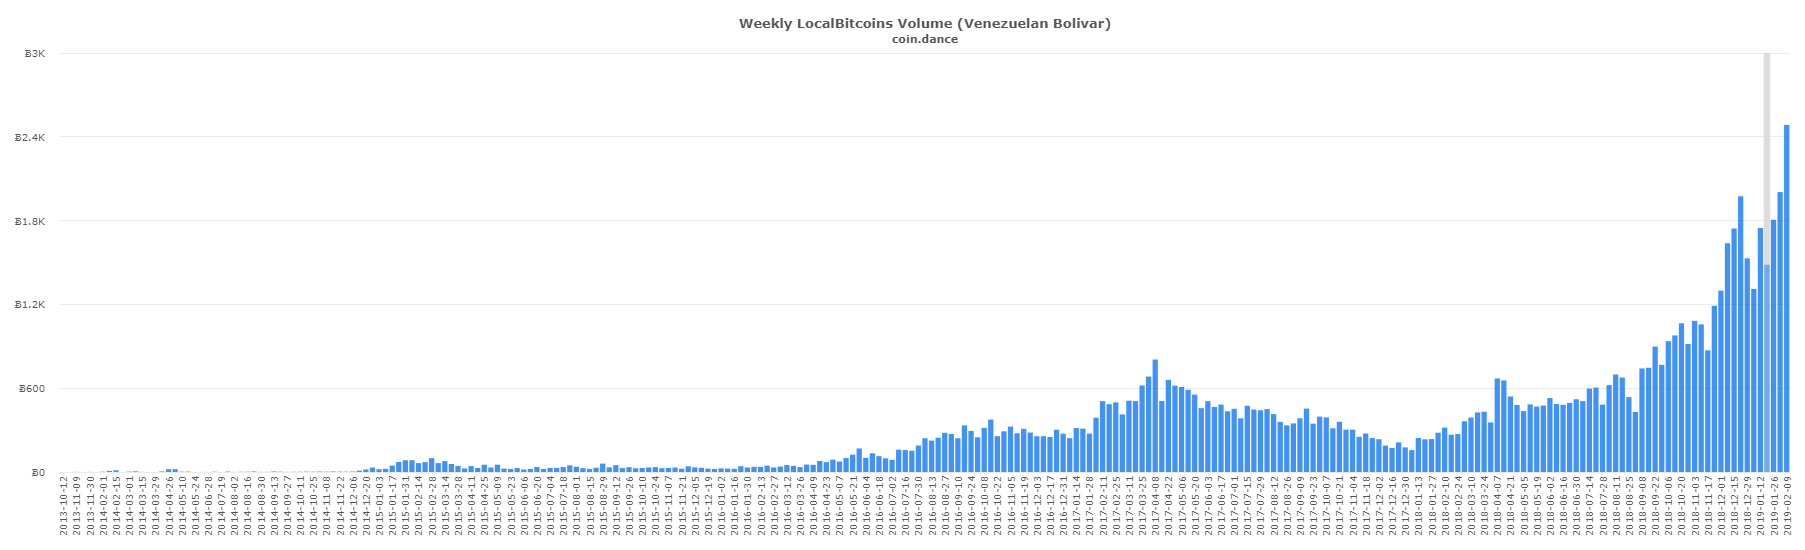 Localbitcoins Trade Surges in Latin America and East Asia